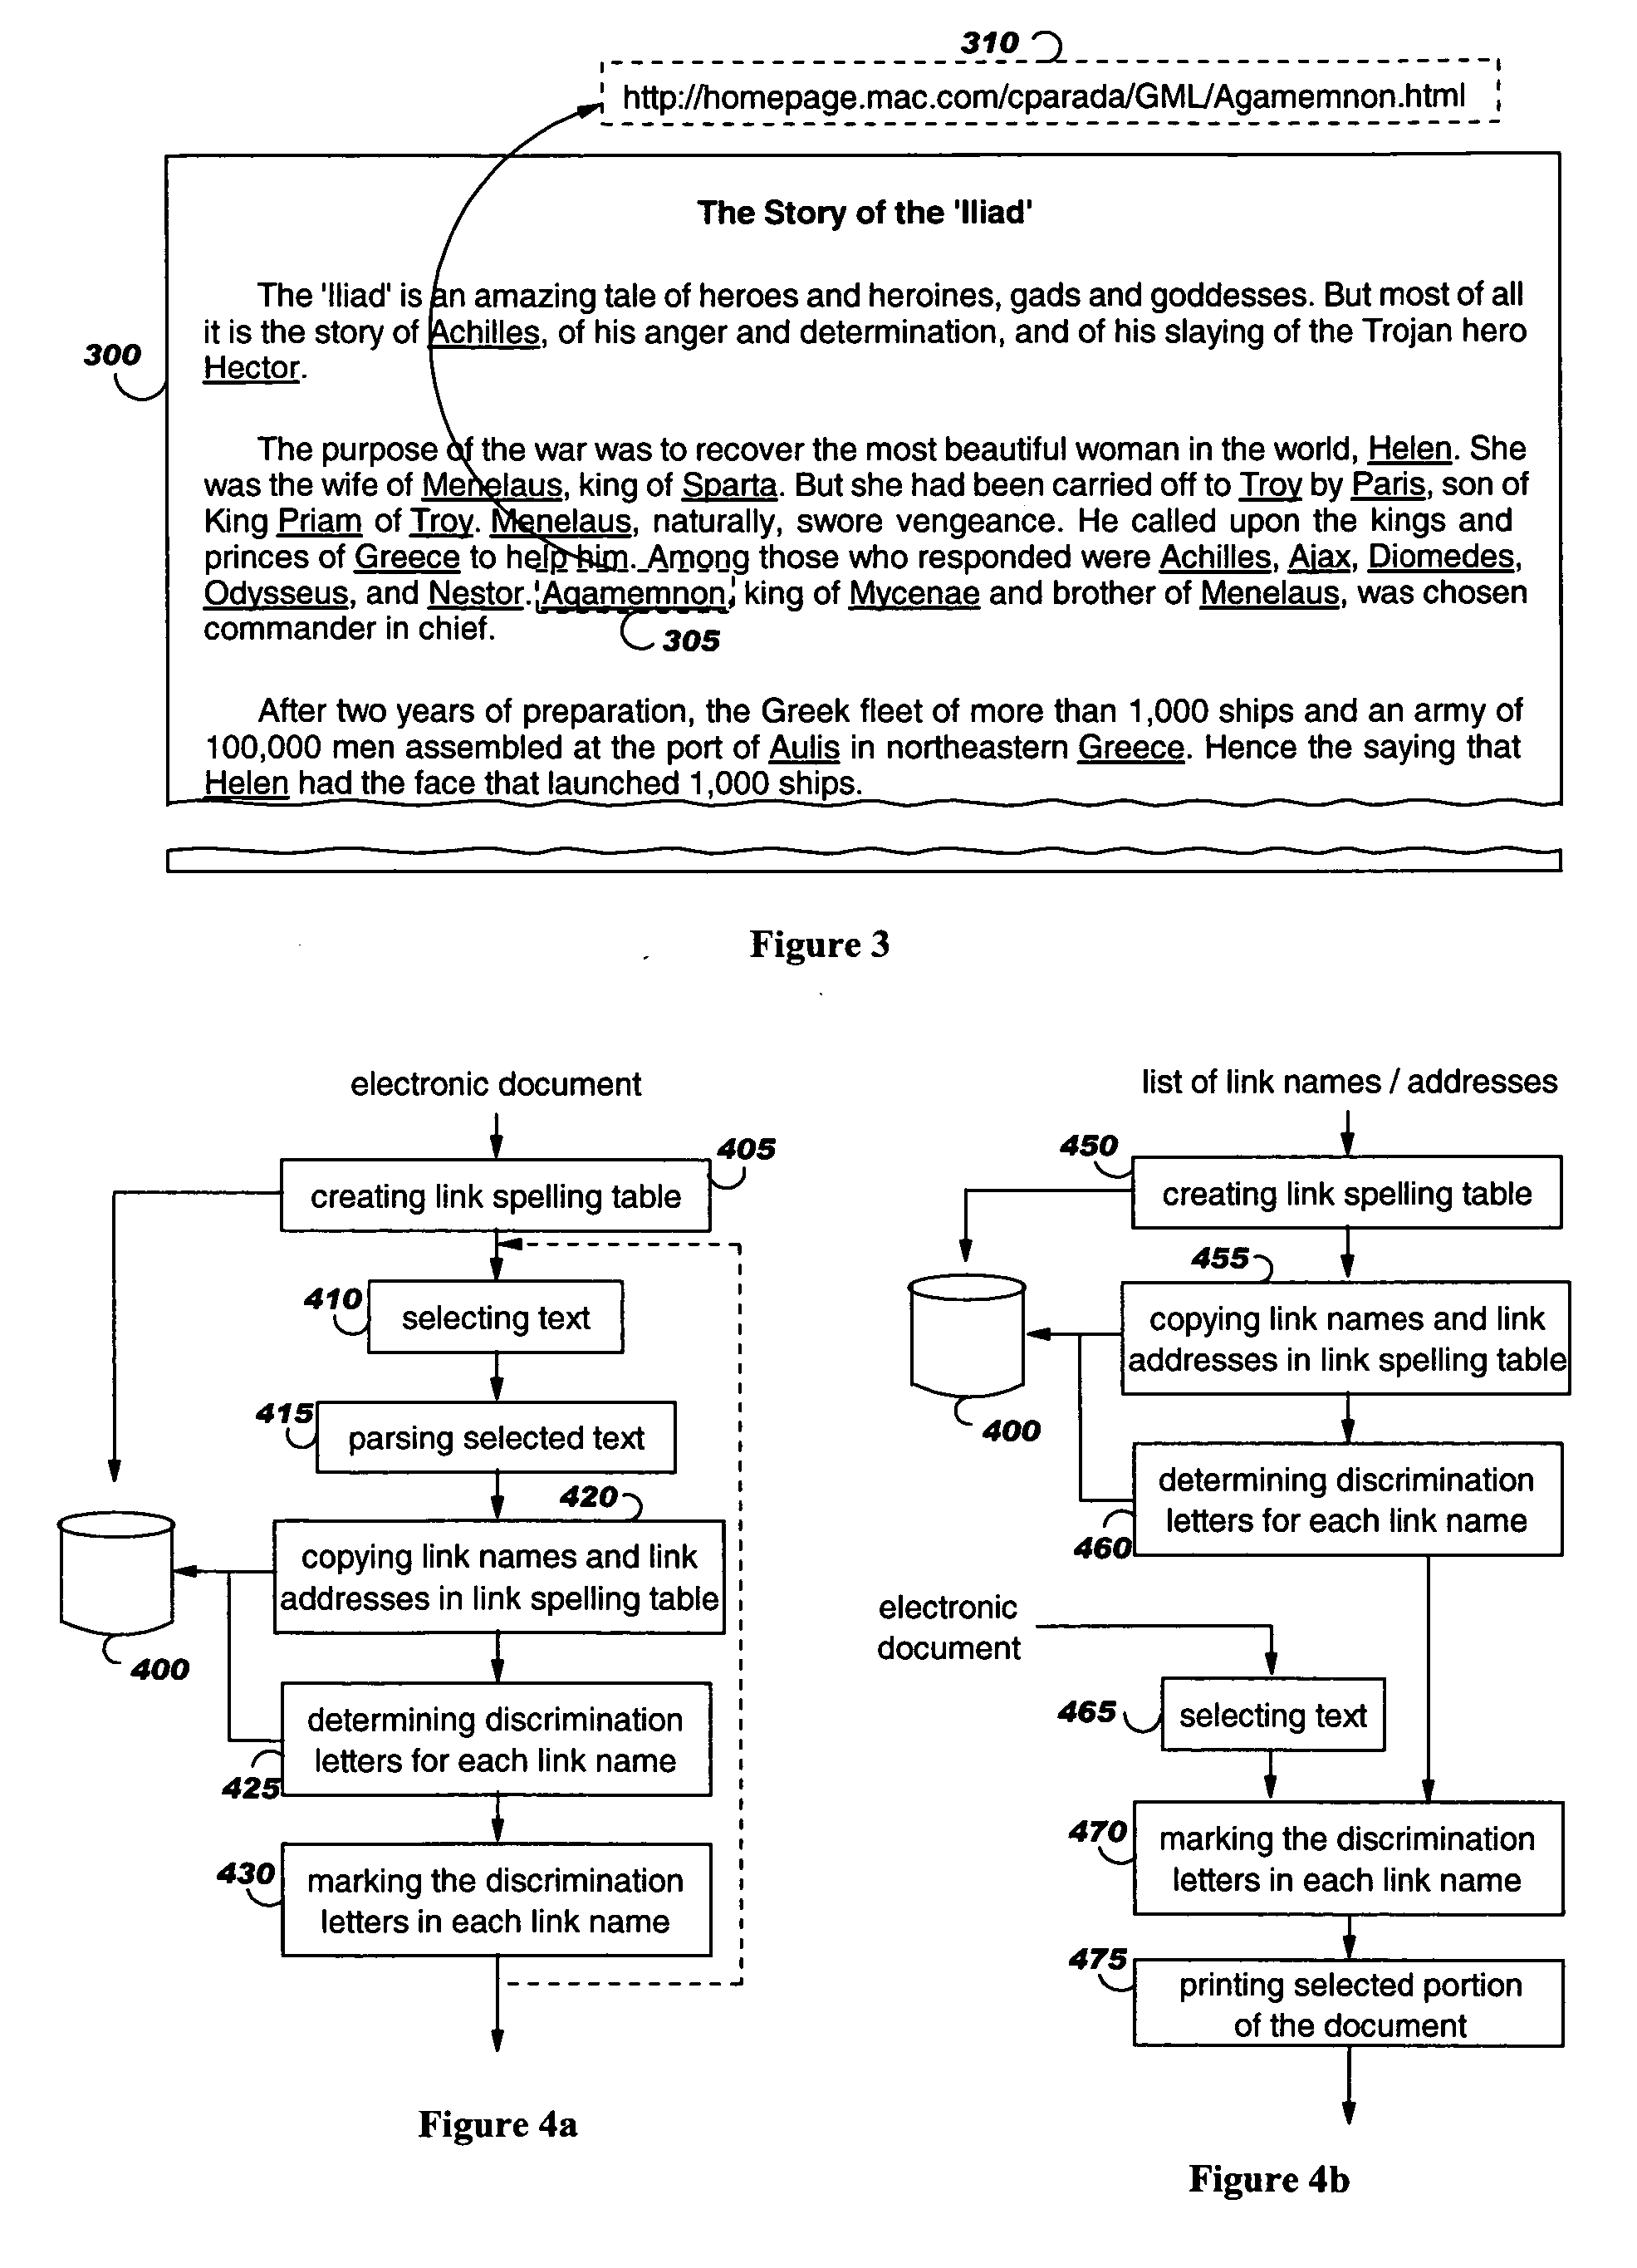 Method and systems for accessing data by spelling discrimination letters of link names